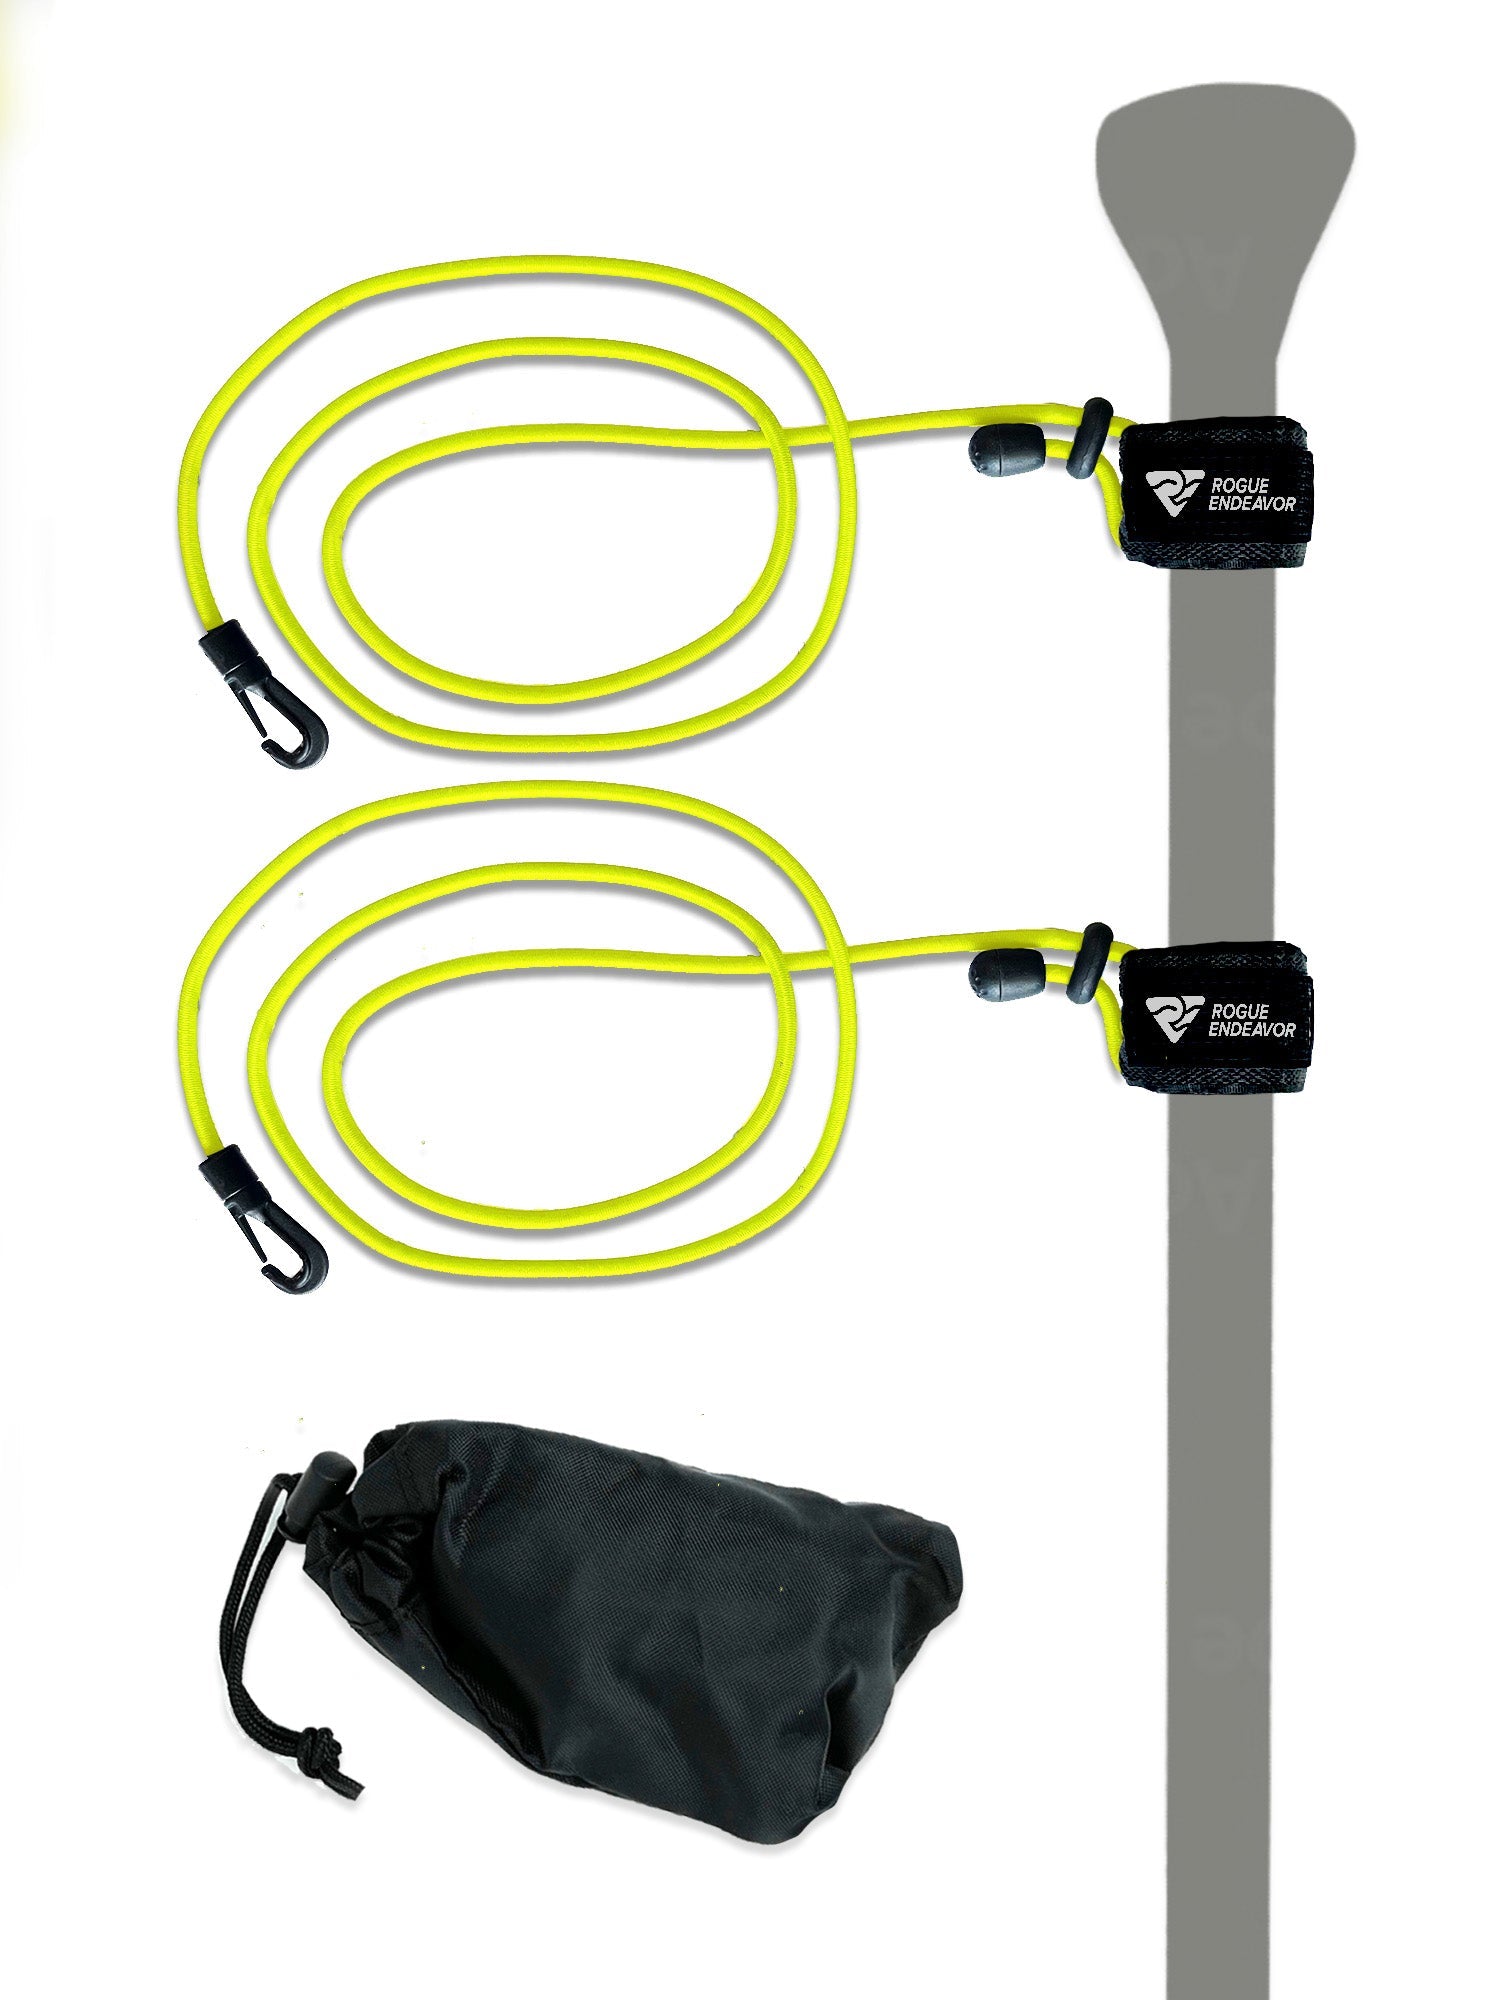 Rogue Endeavor Rod Leash & Paddle Leash Kit, Set of 2, Kayak Fishing & Paddle Boarding- 48 Shock Cord Bungee, Quick Release Clip, Neoprene Lined